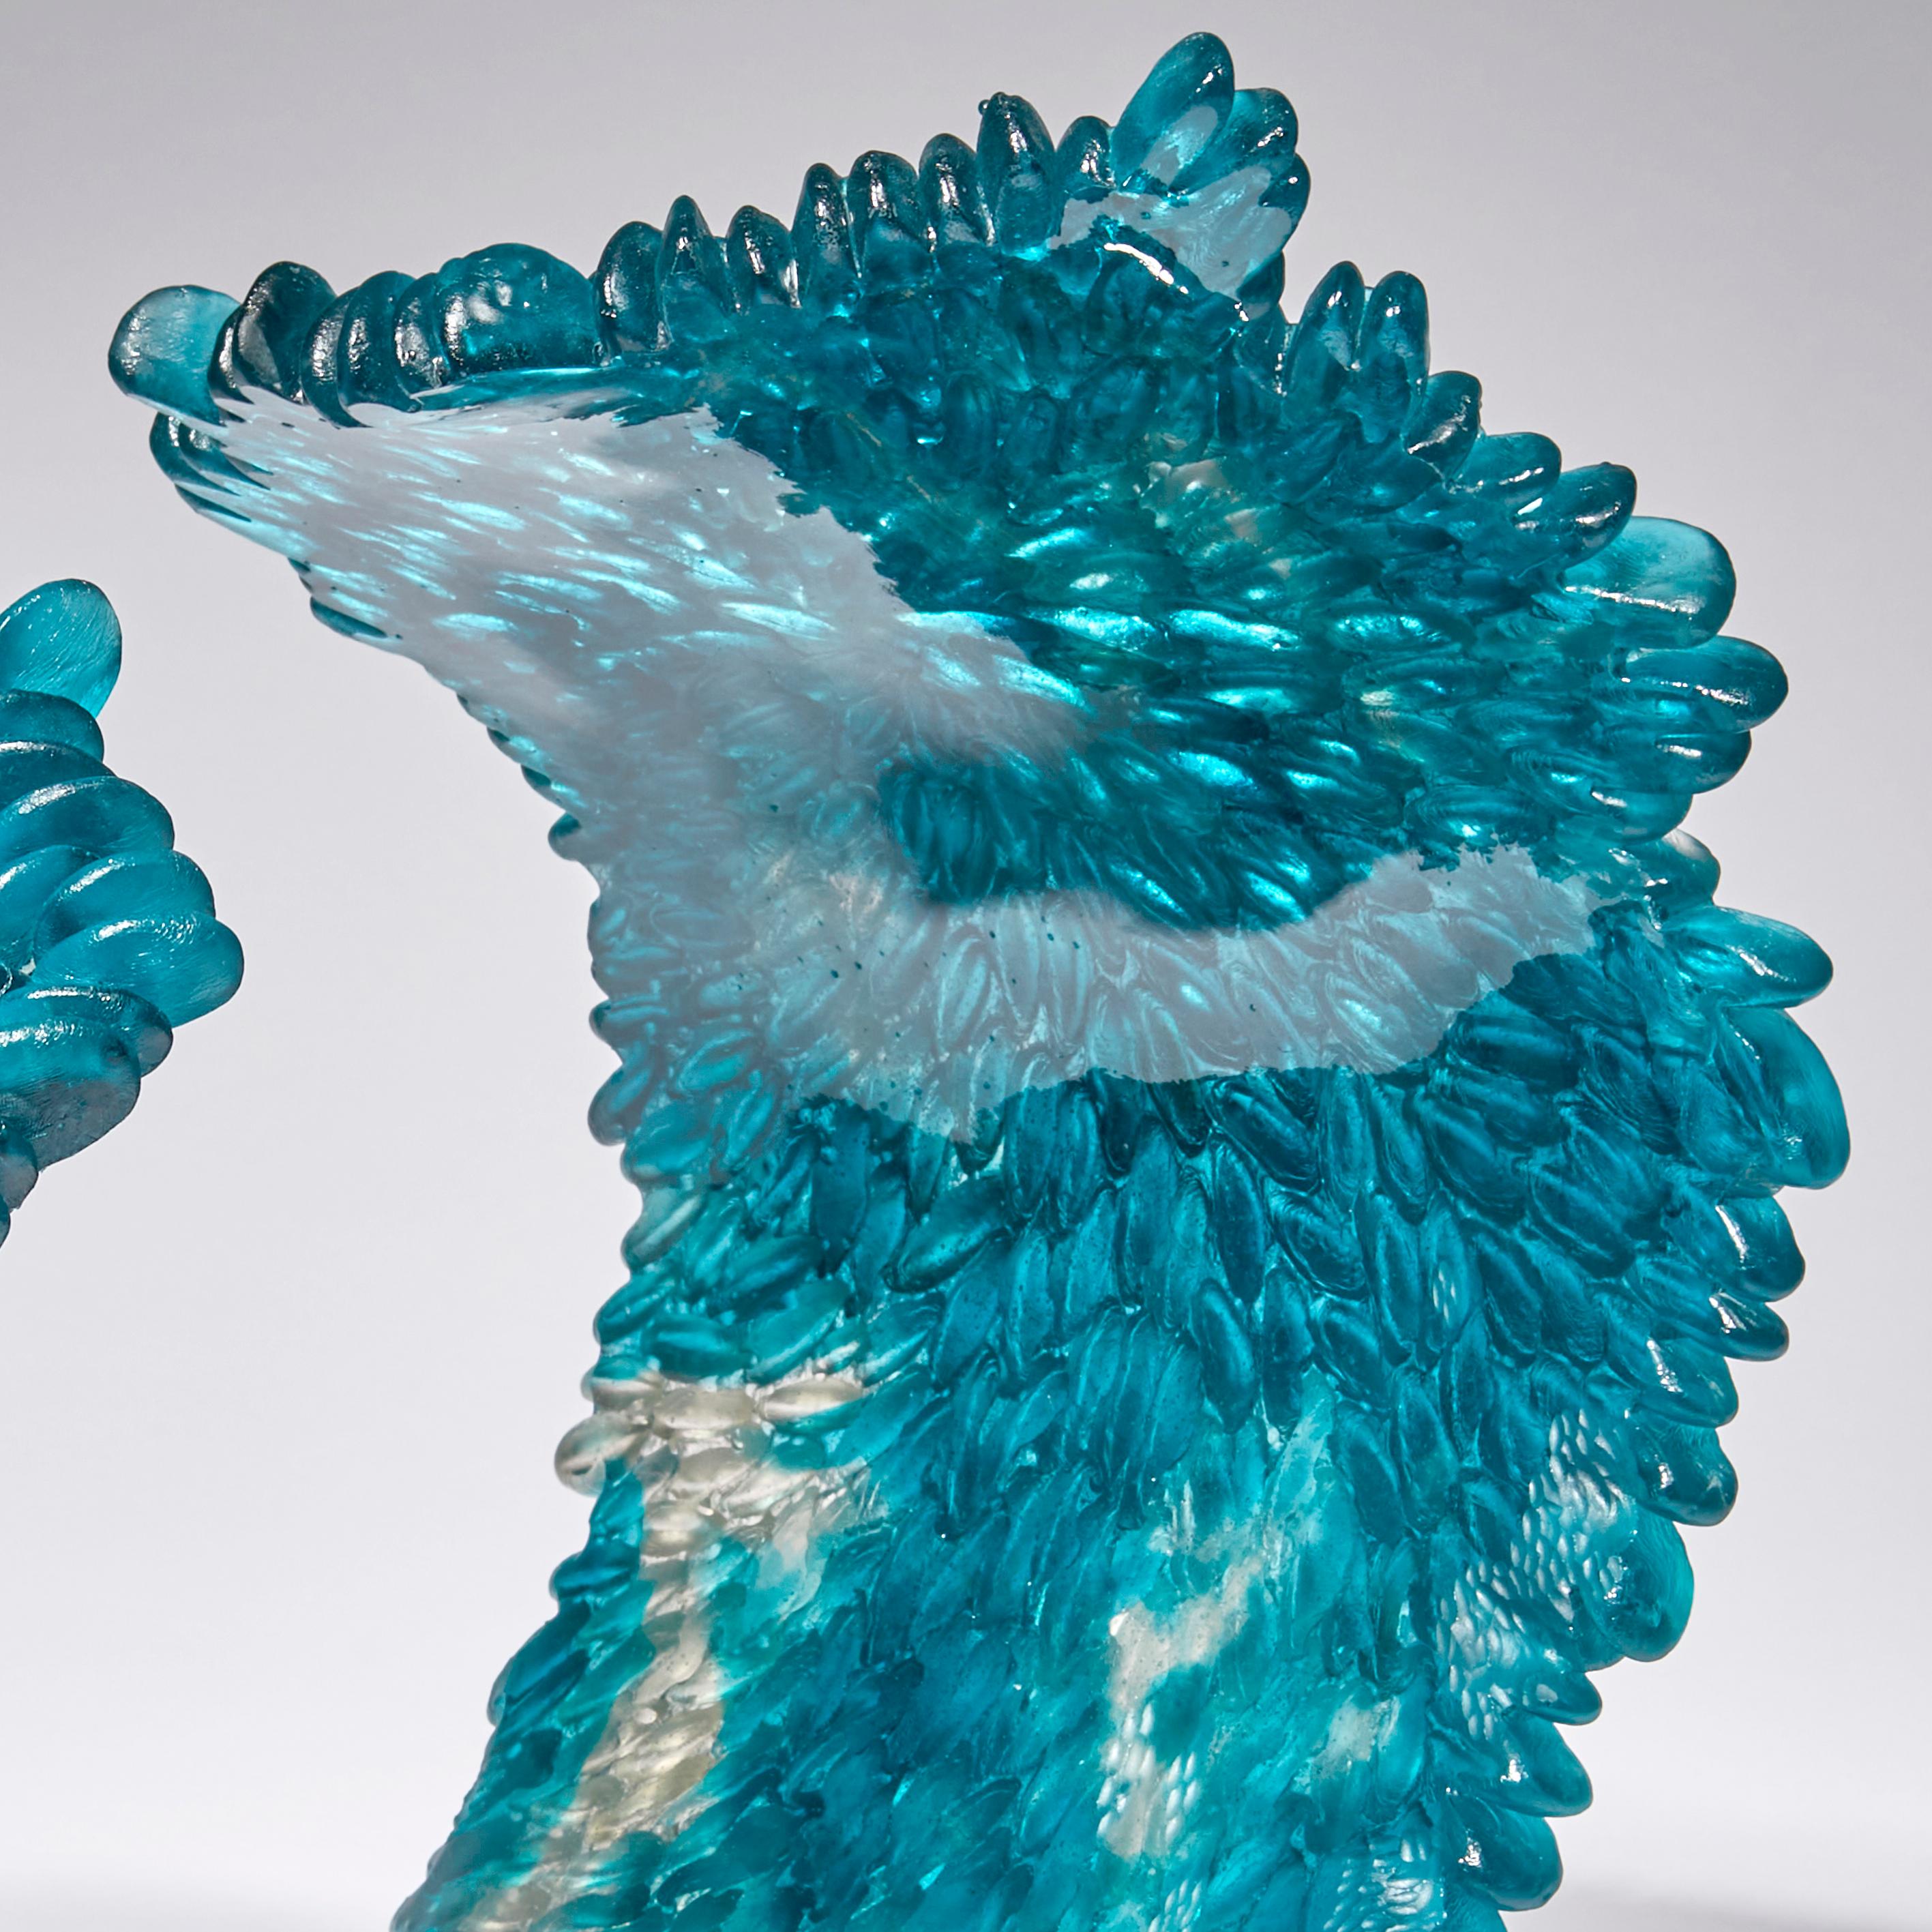 Hand-Crafted Curled Over V, a Unique Glass Sculpture in Teal & Grey by Nina Casson McGarva